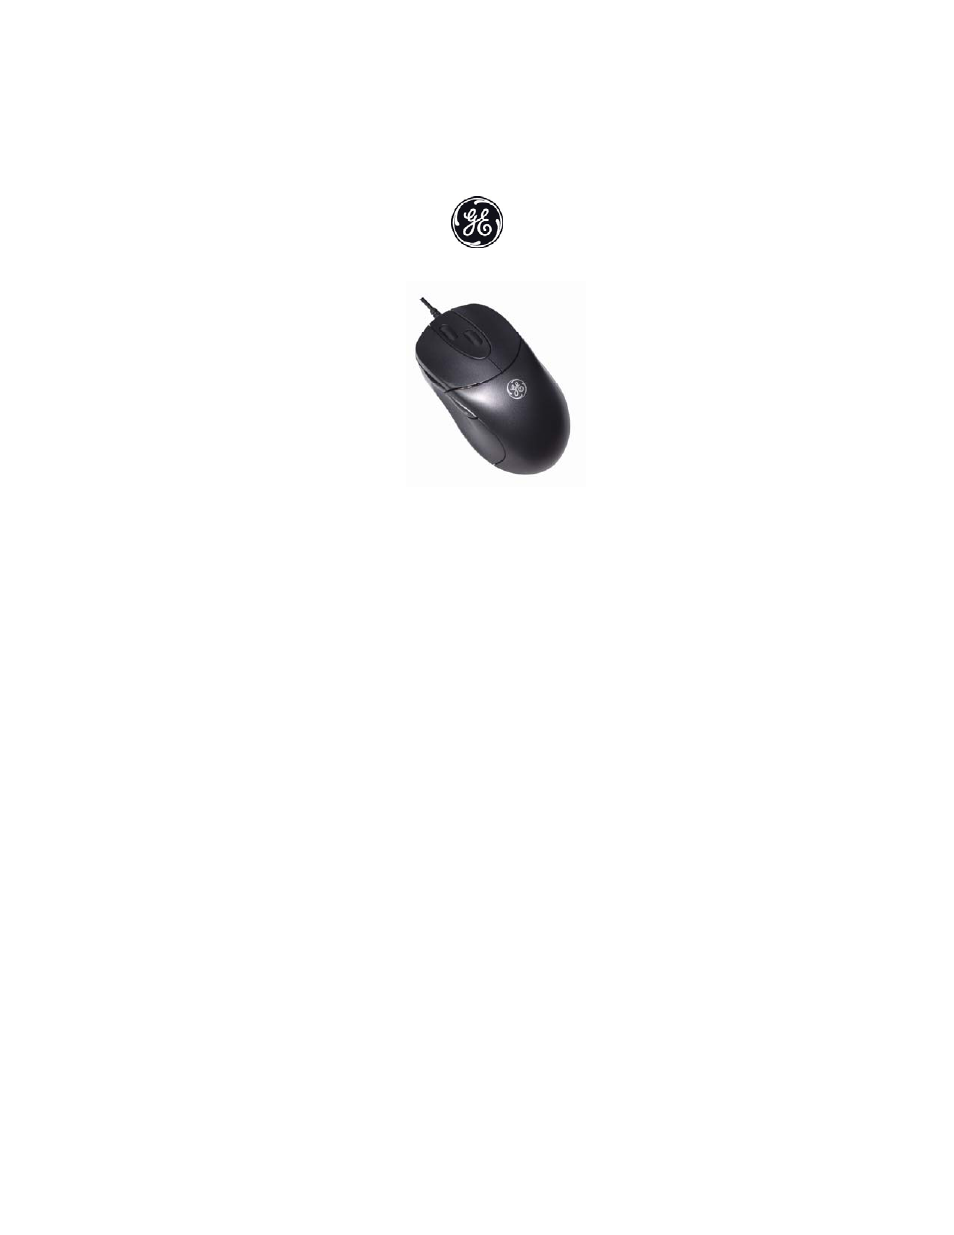 Ge Deluxe Optical Mouse Model 97769 Driver